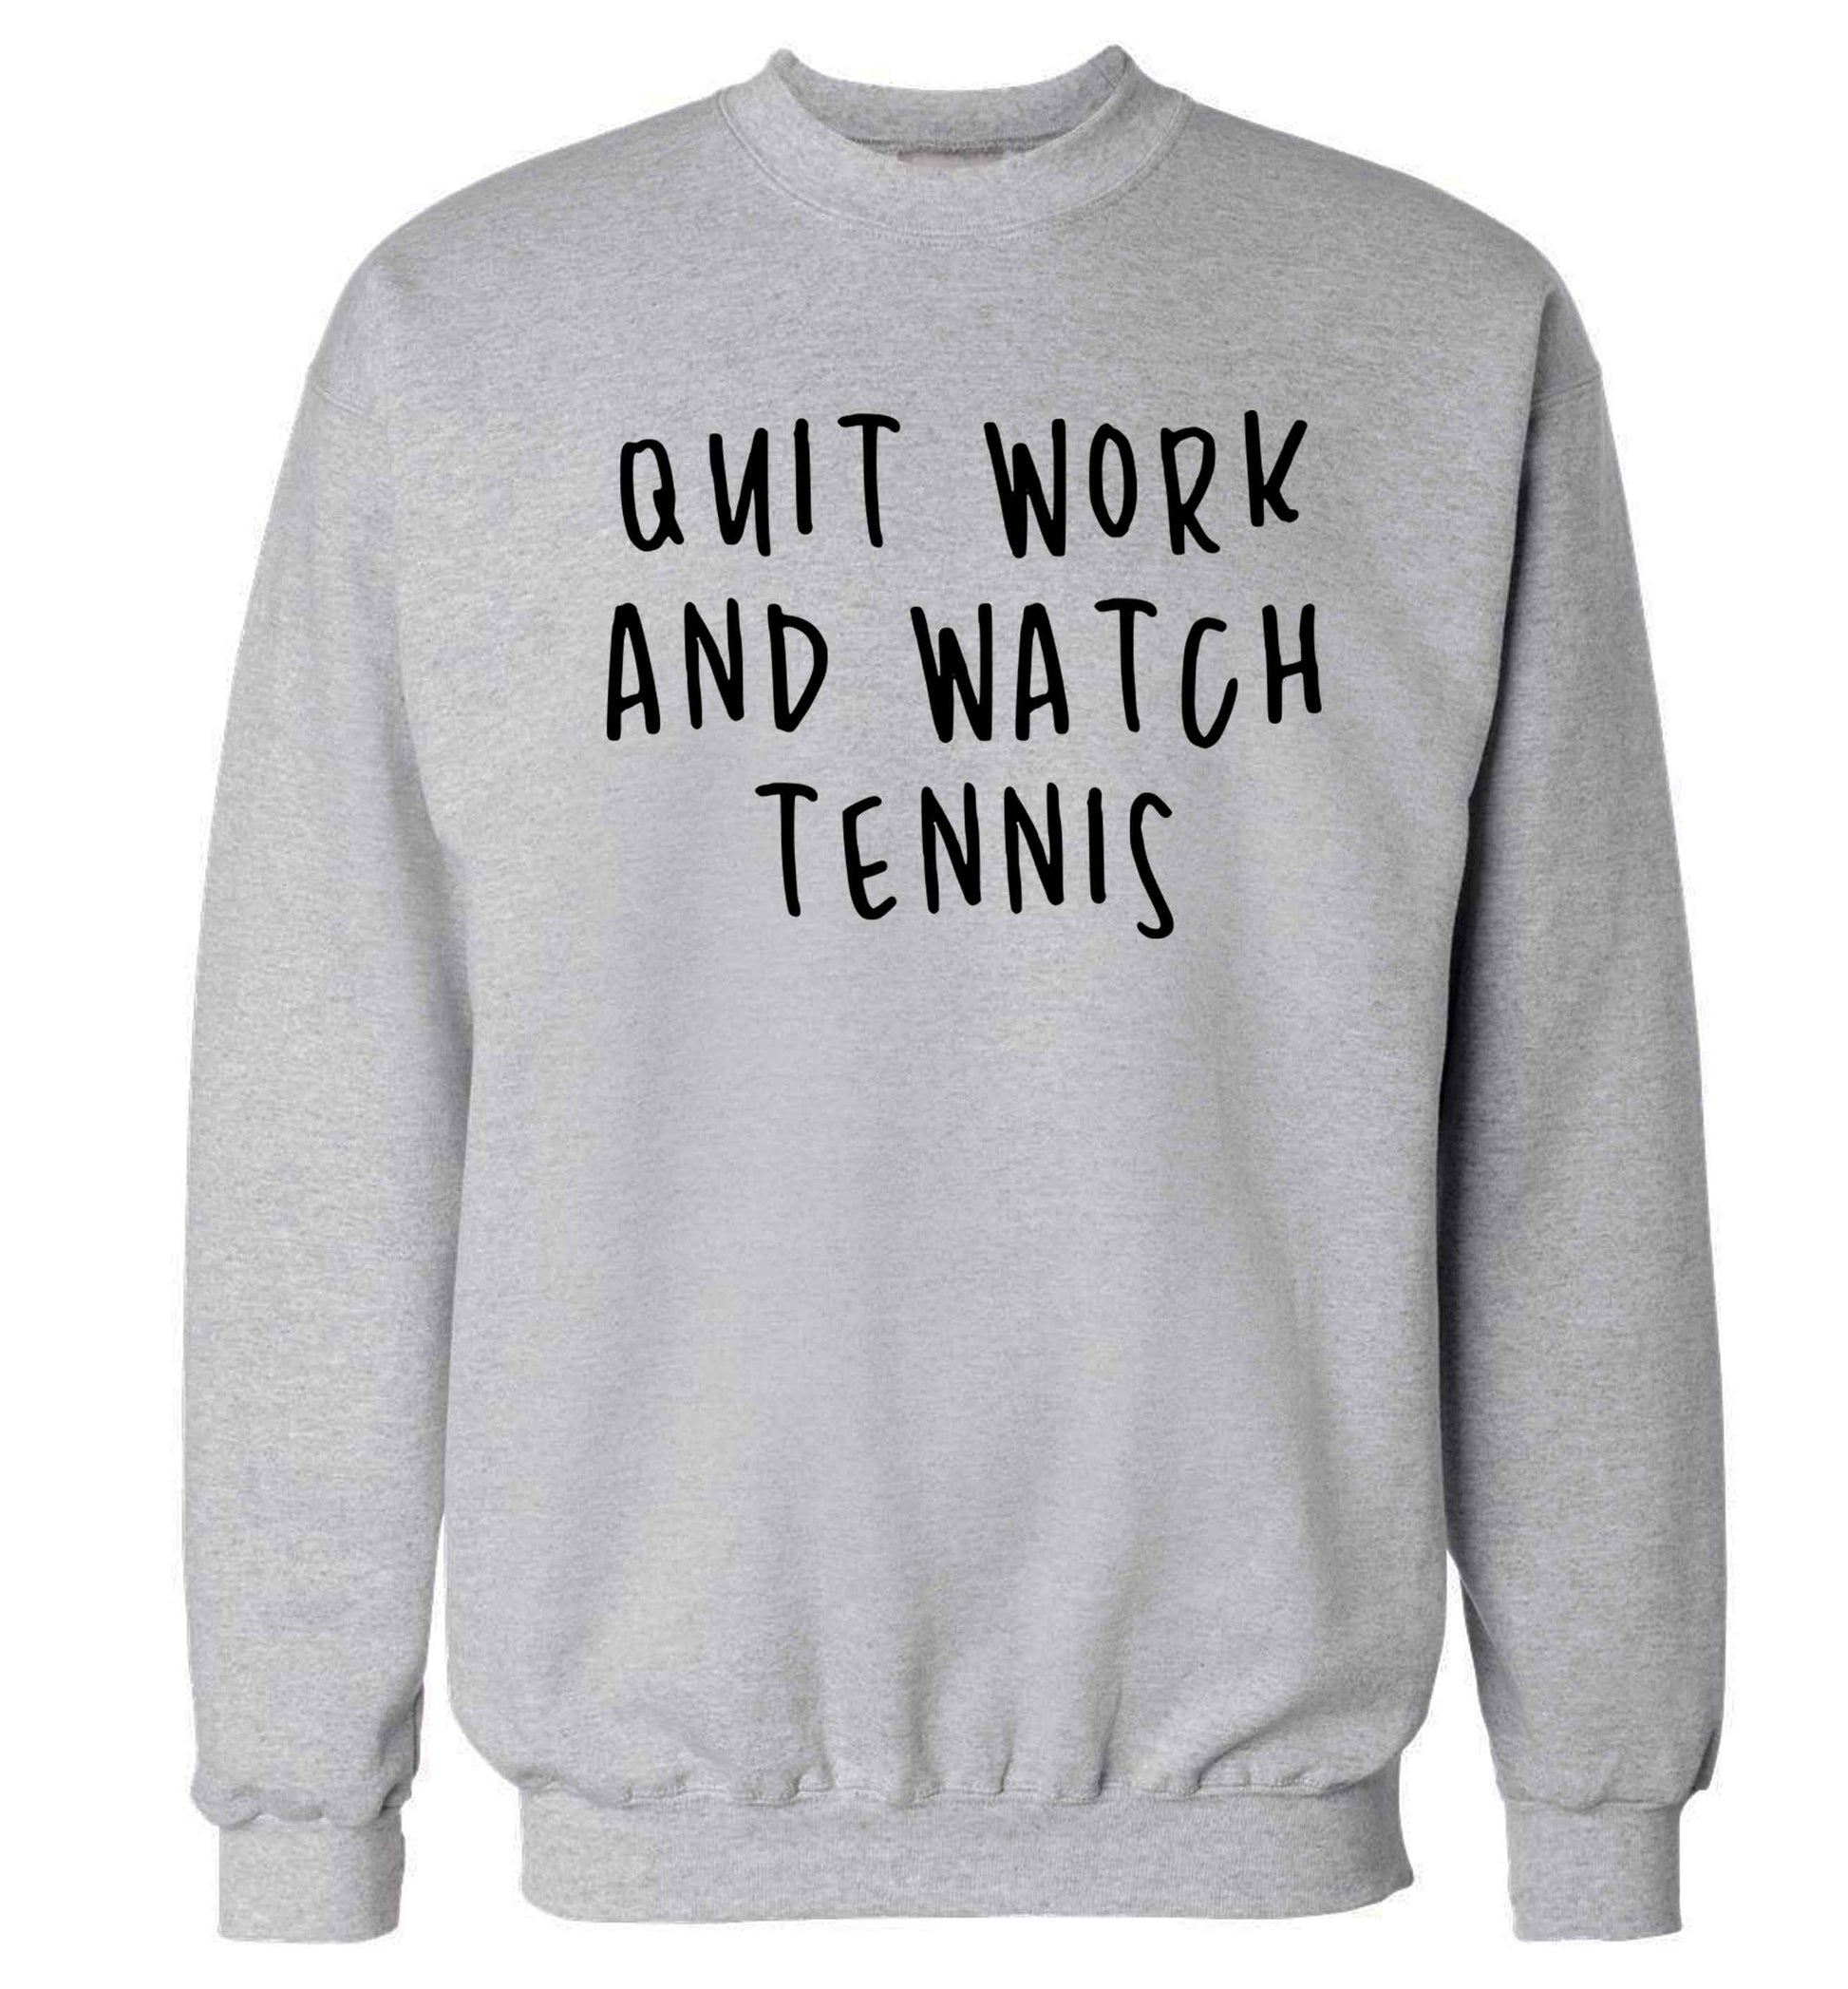 Quit work and watch tennis Adult's unisex grey Sweater 2XL